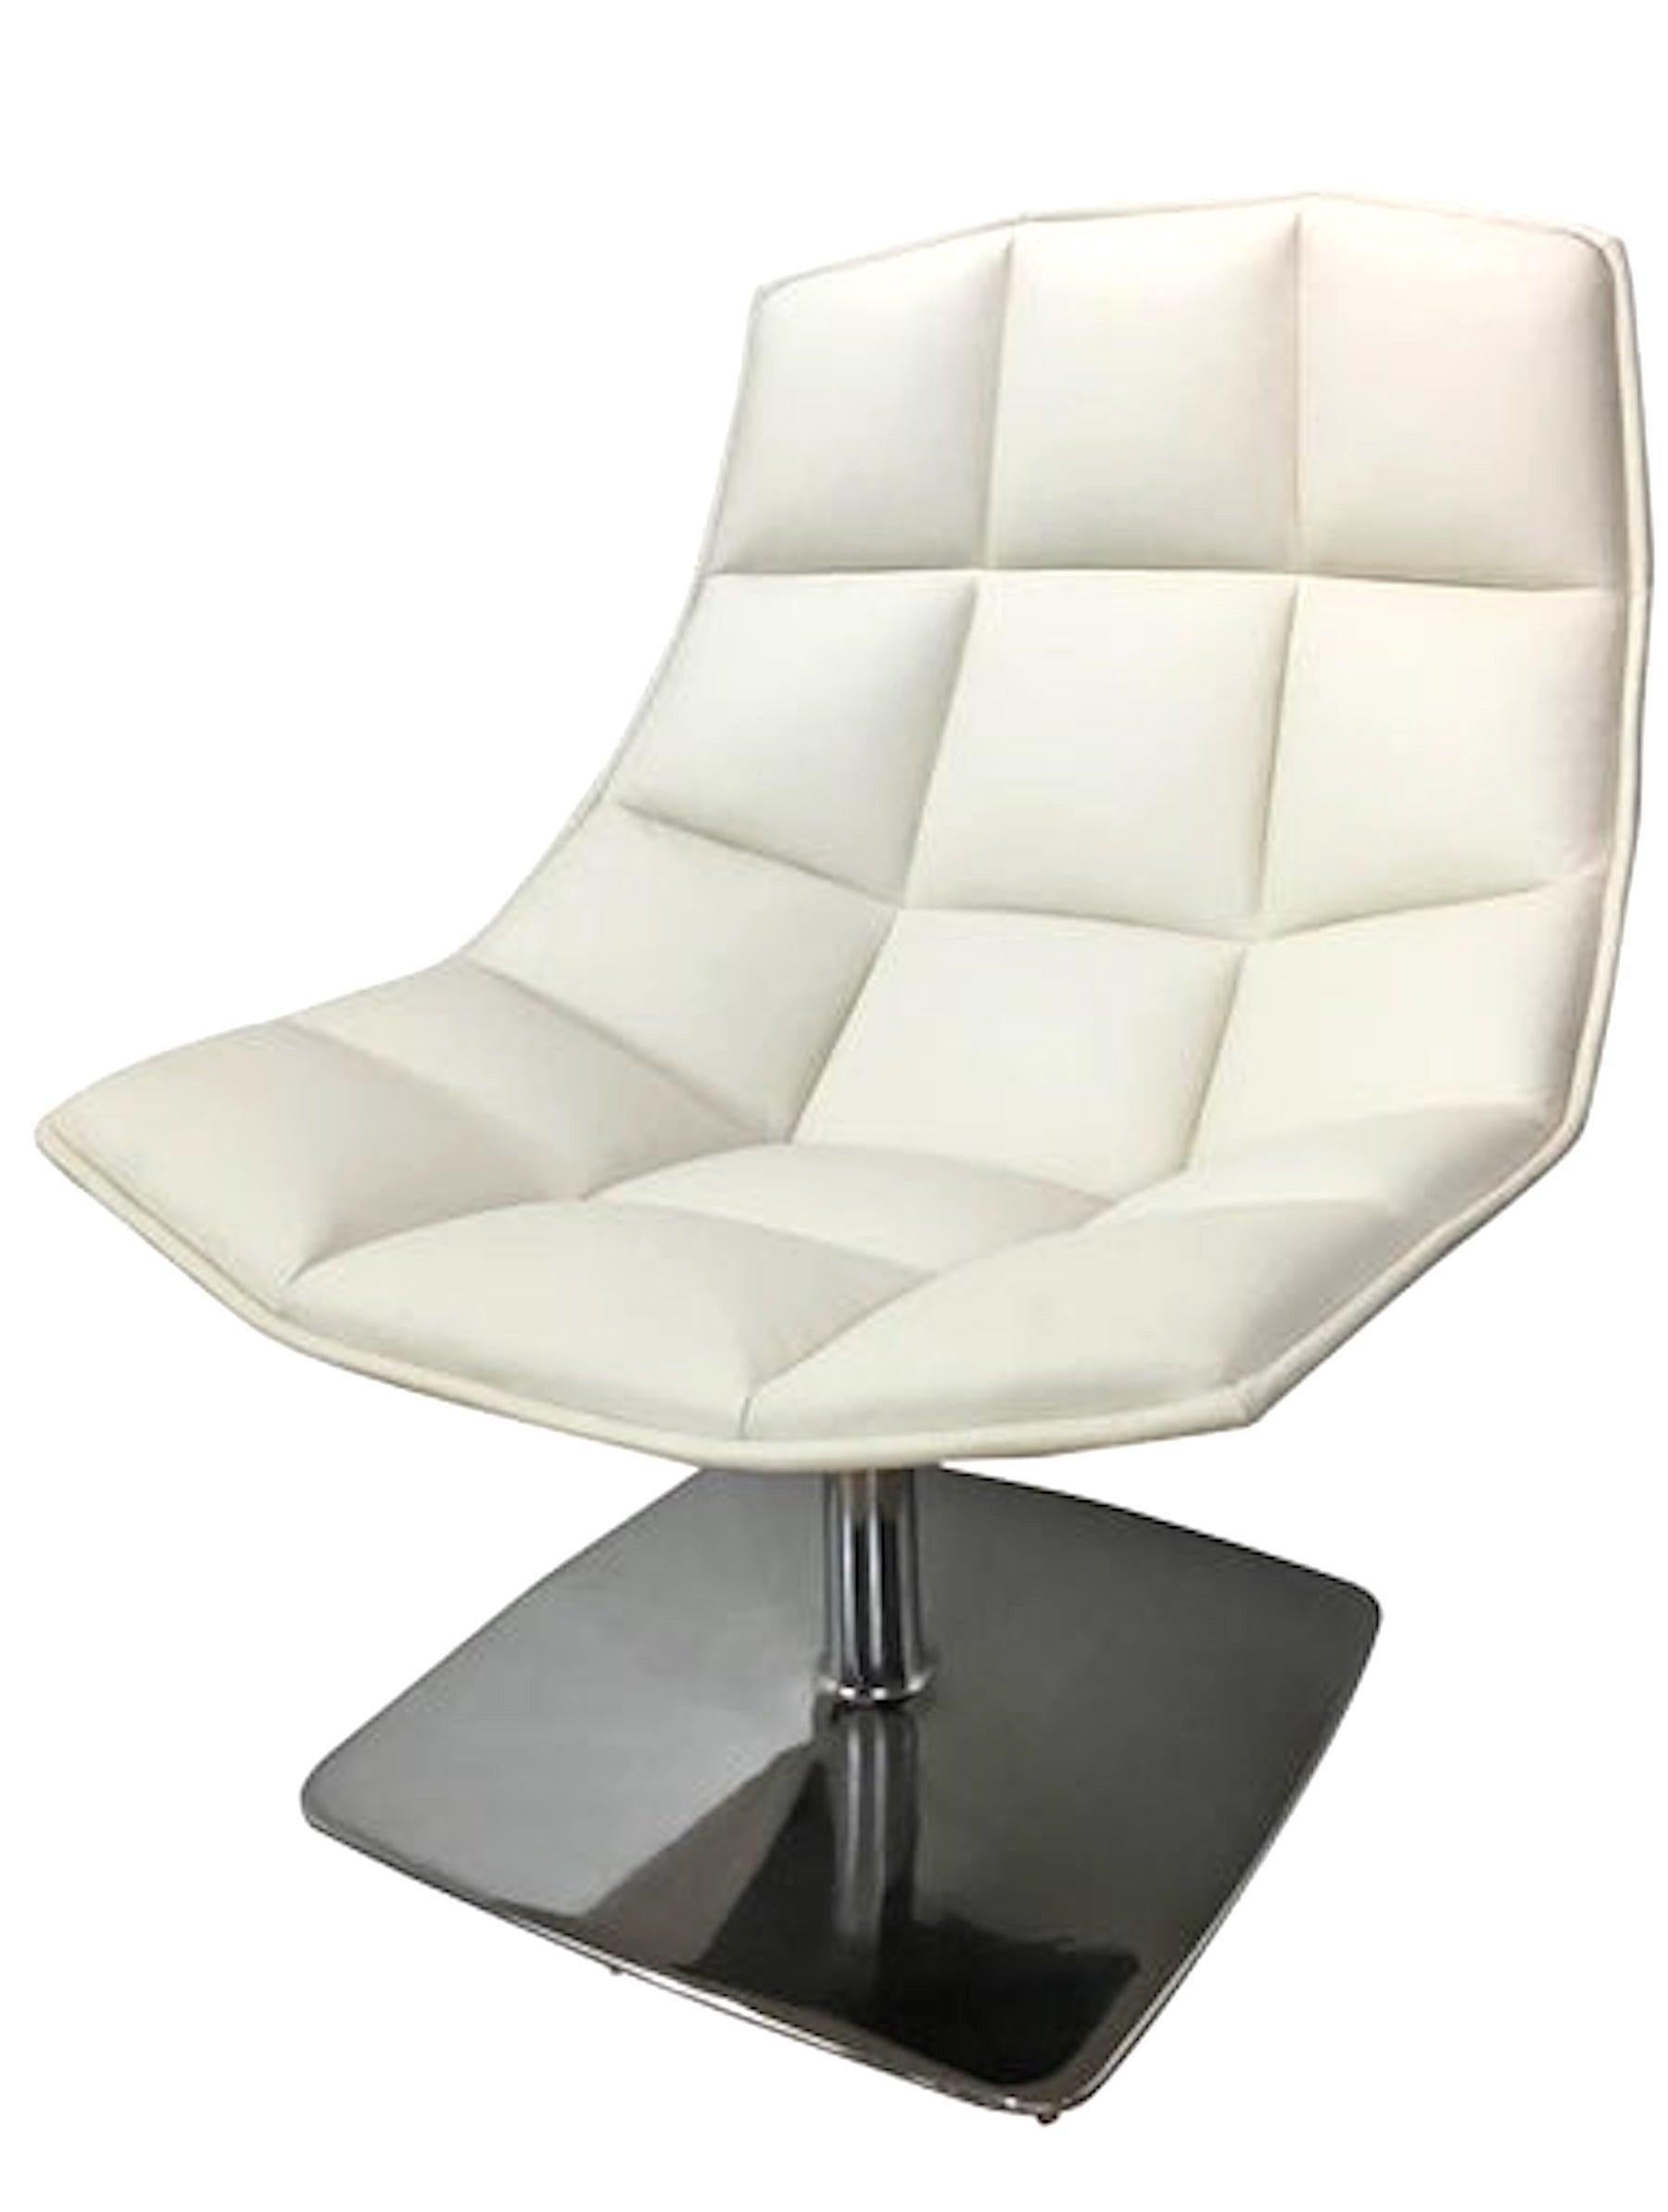 Contemporary Jehs and Laub for Knoll Chair For Sale